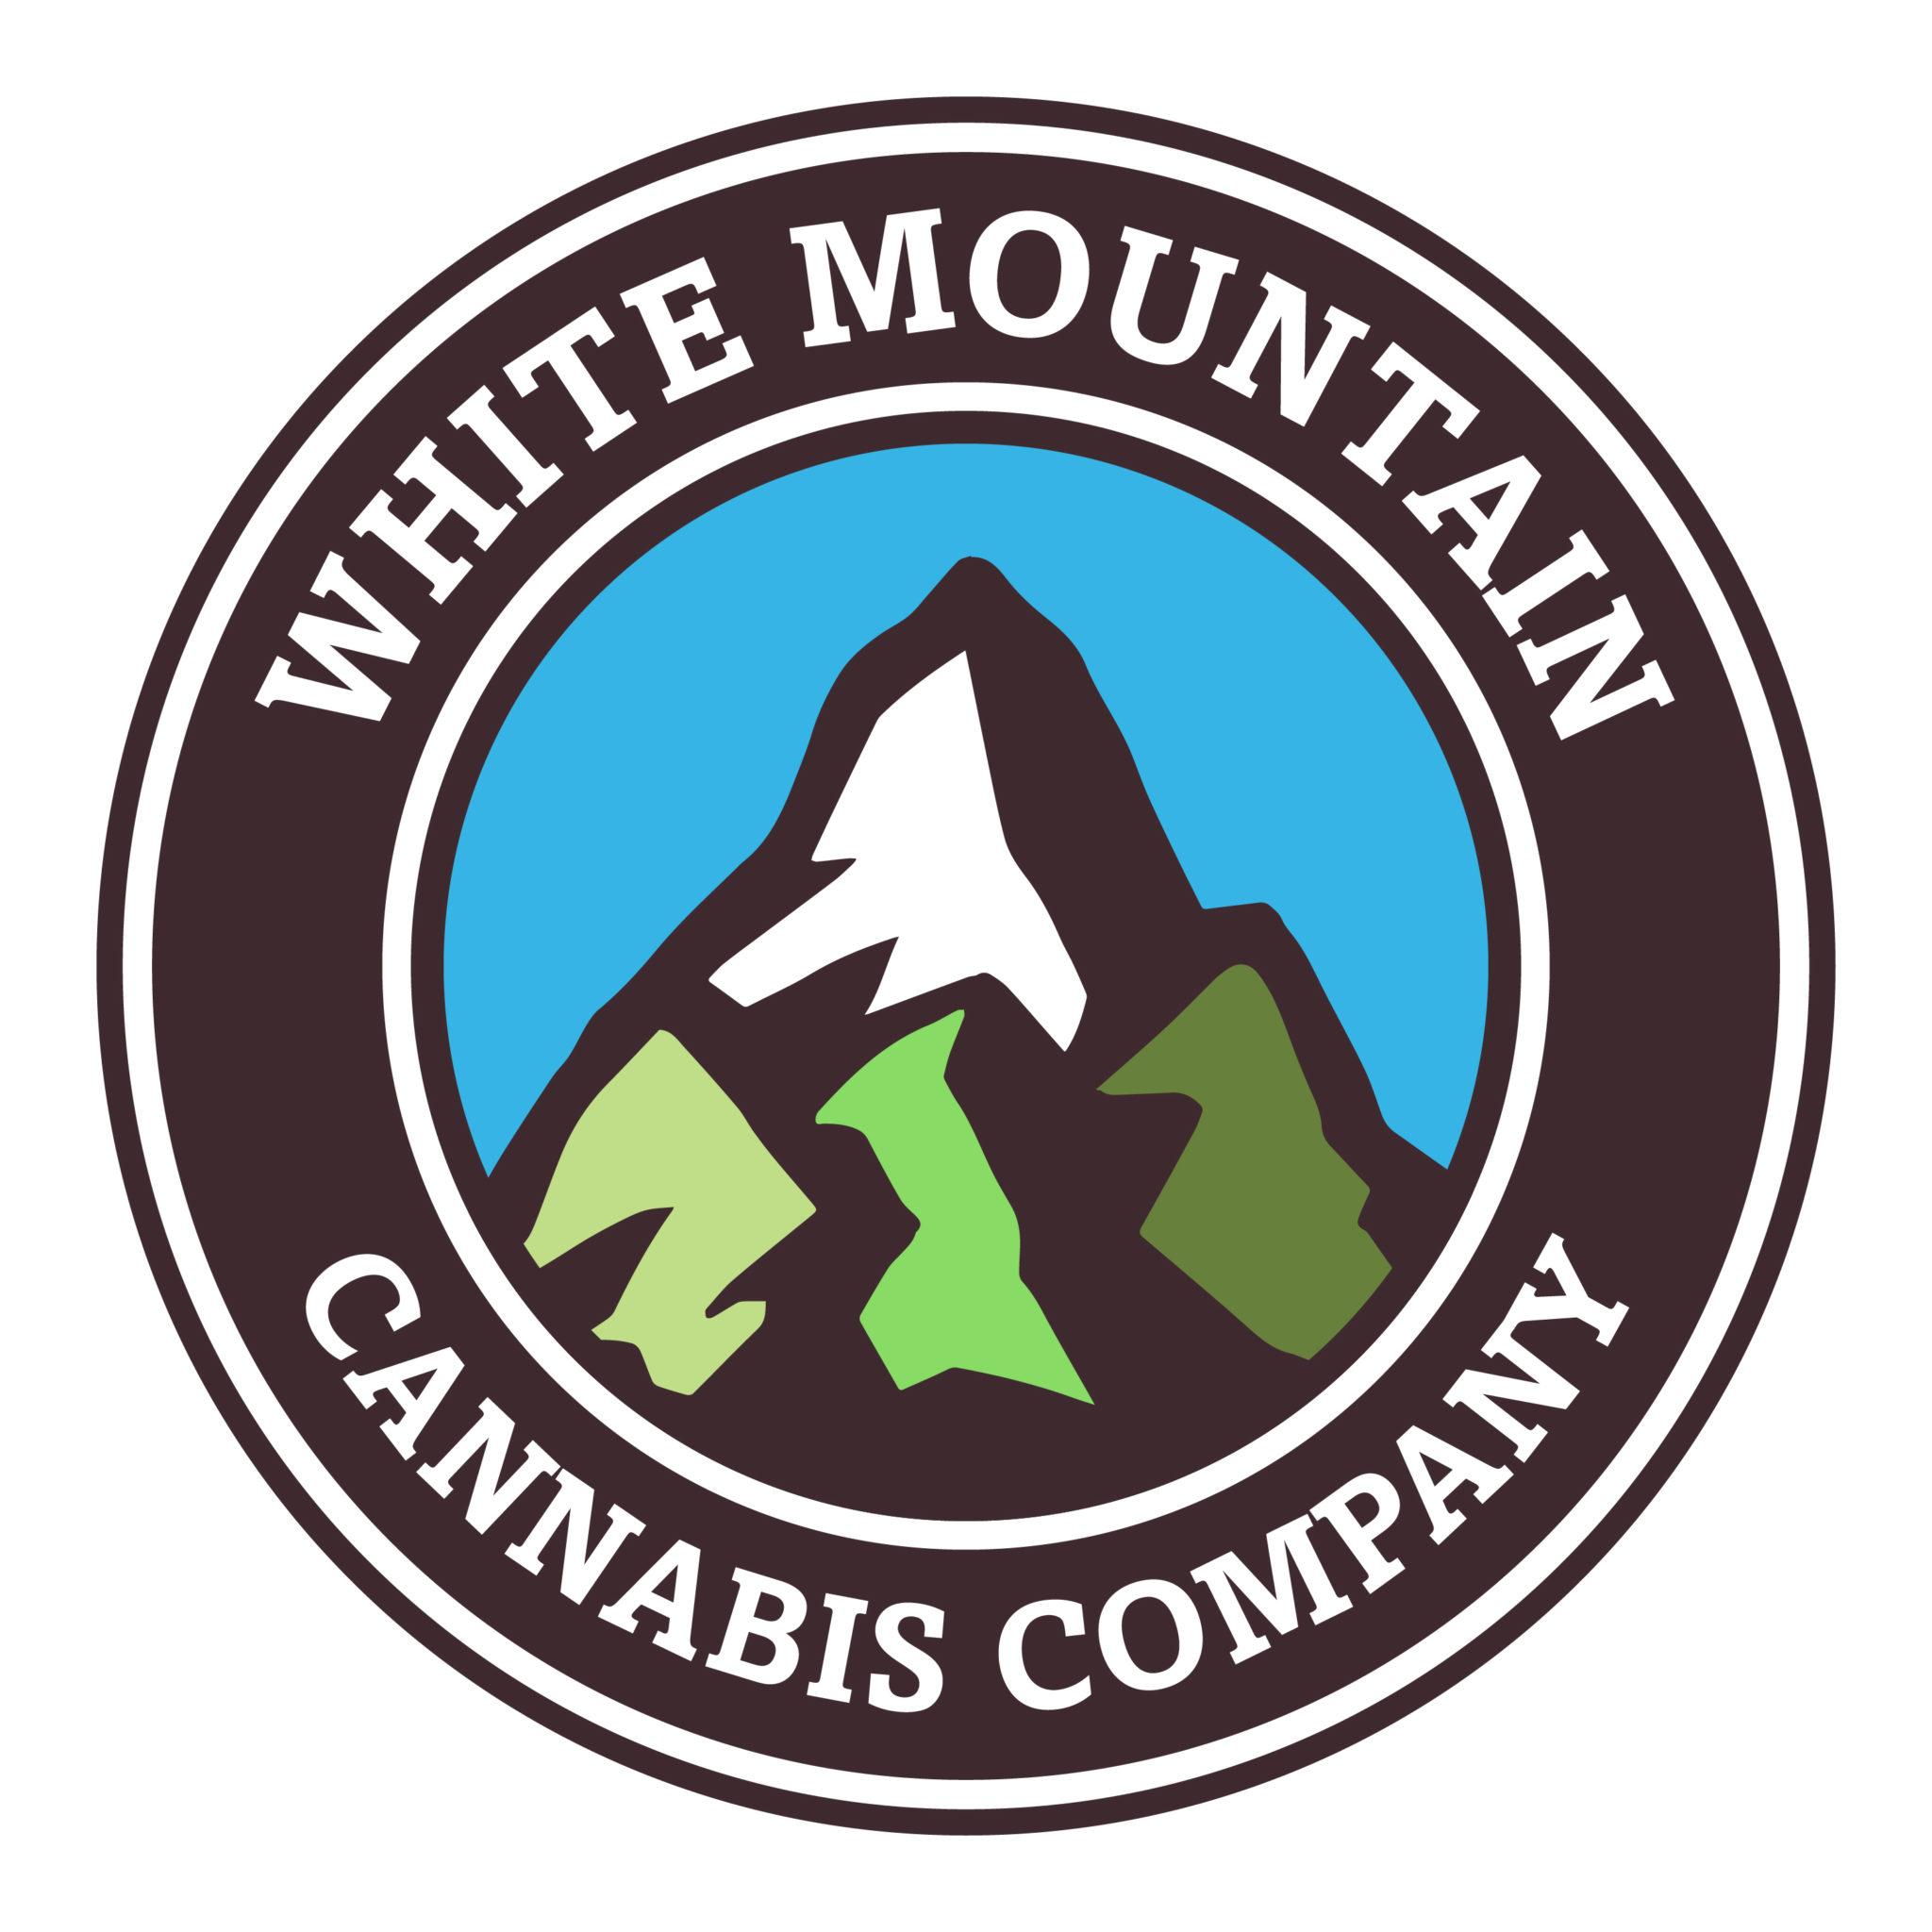 Blue Circle with White Mountain Logo - White Mountain Cannabis Company - CannaPlanners